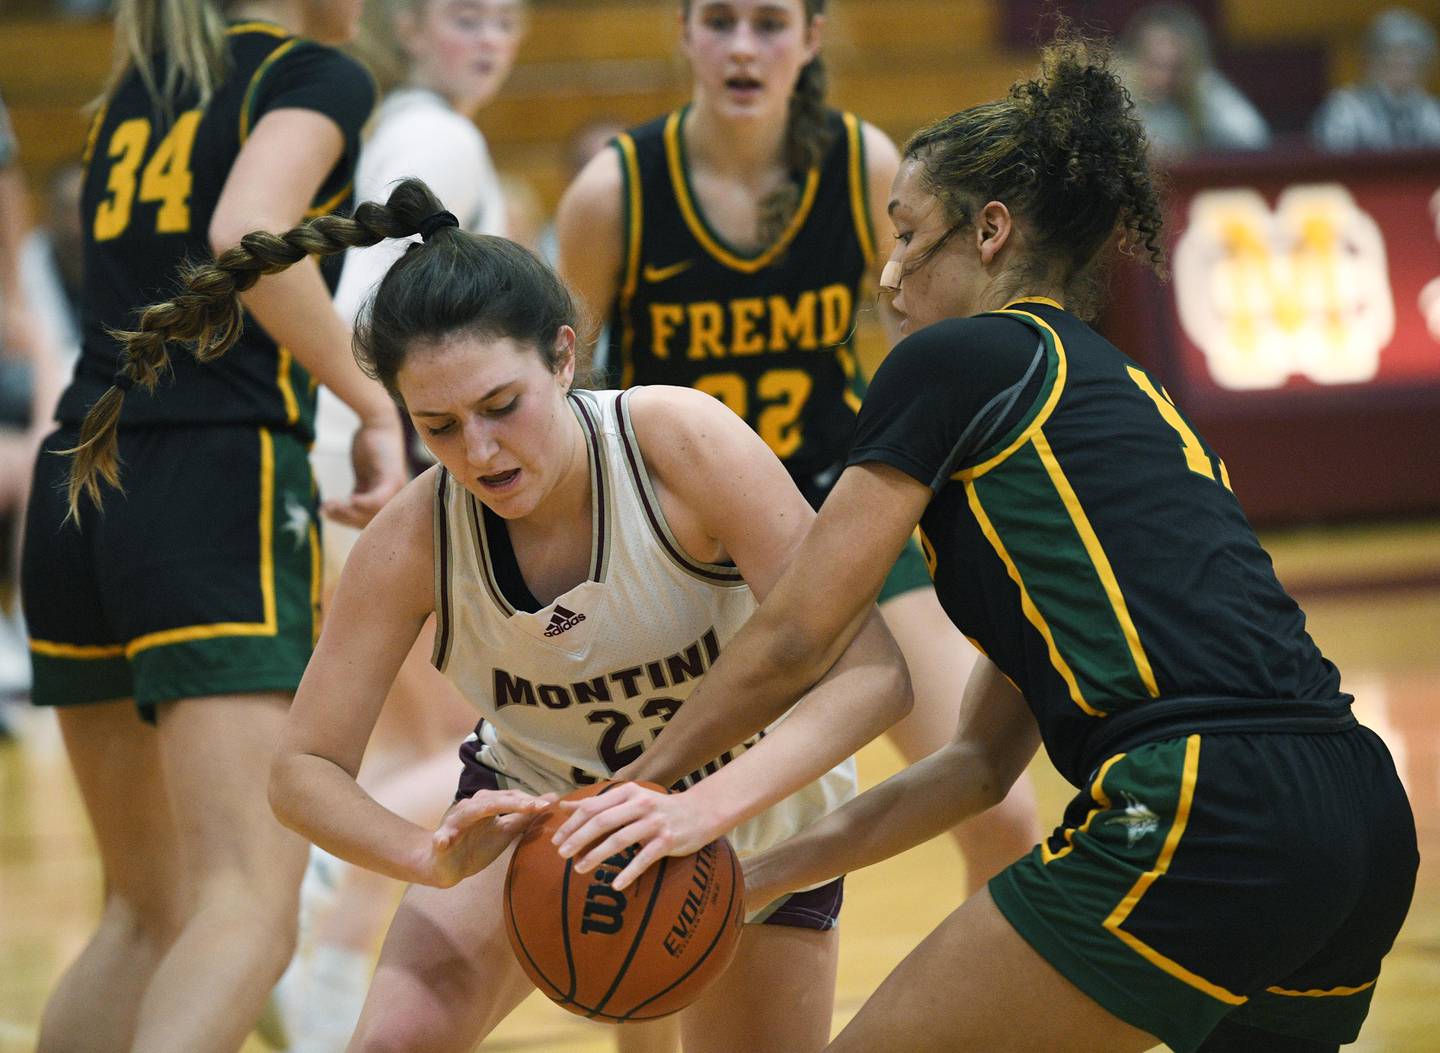 Montini’s Shea Carver and Fremd’s Kace Urlacher battle for the ball in a girls basketball game in Lombard on Monday, January 23, 2023.